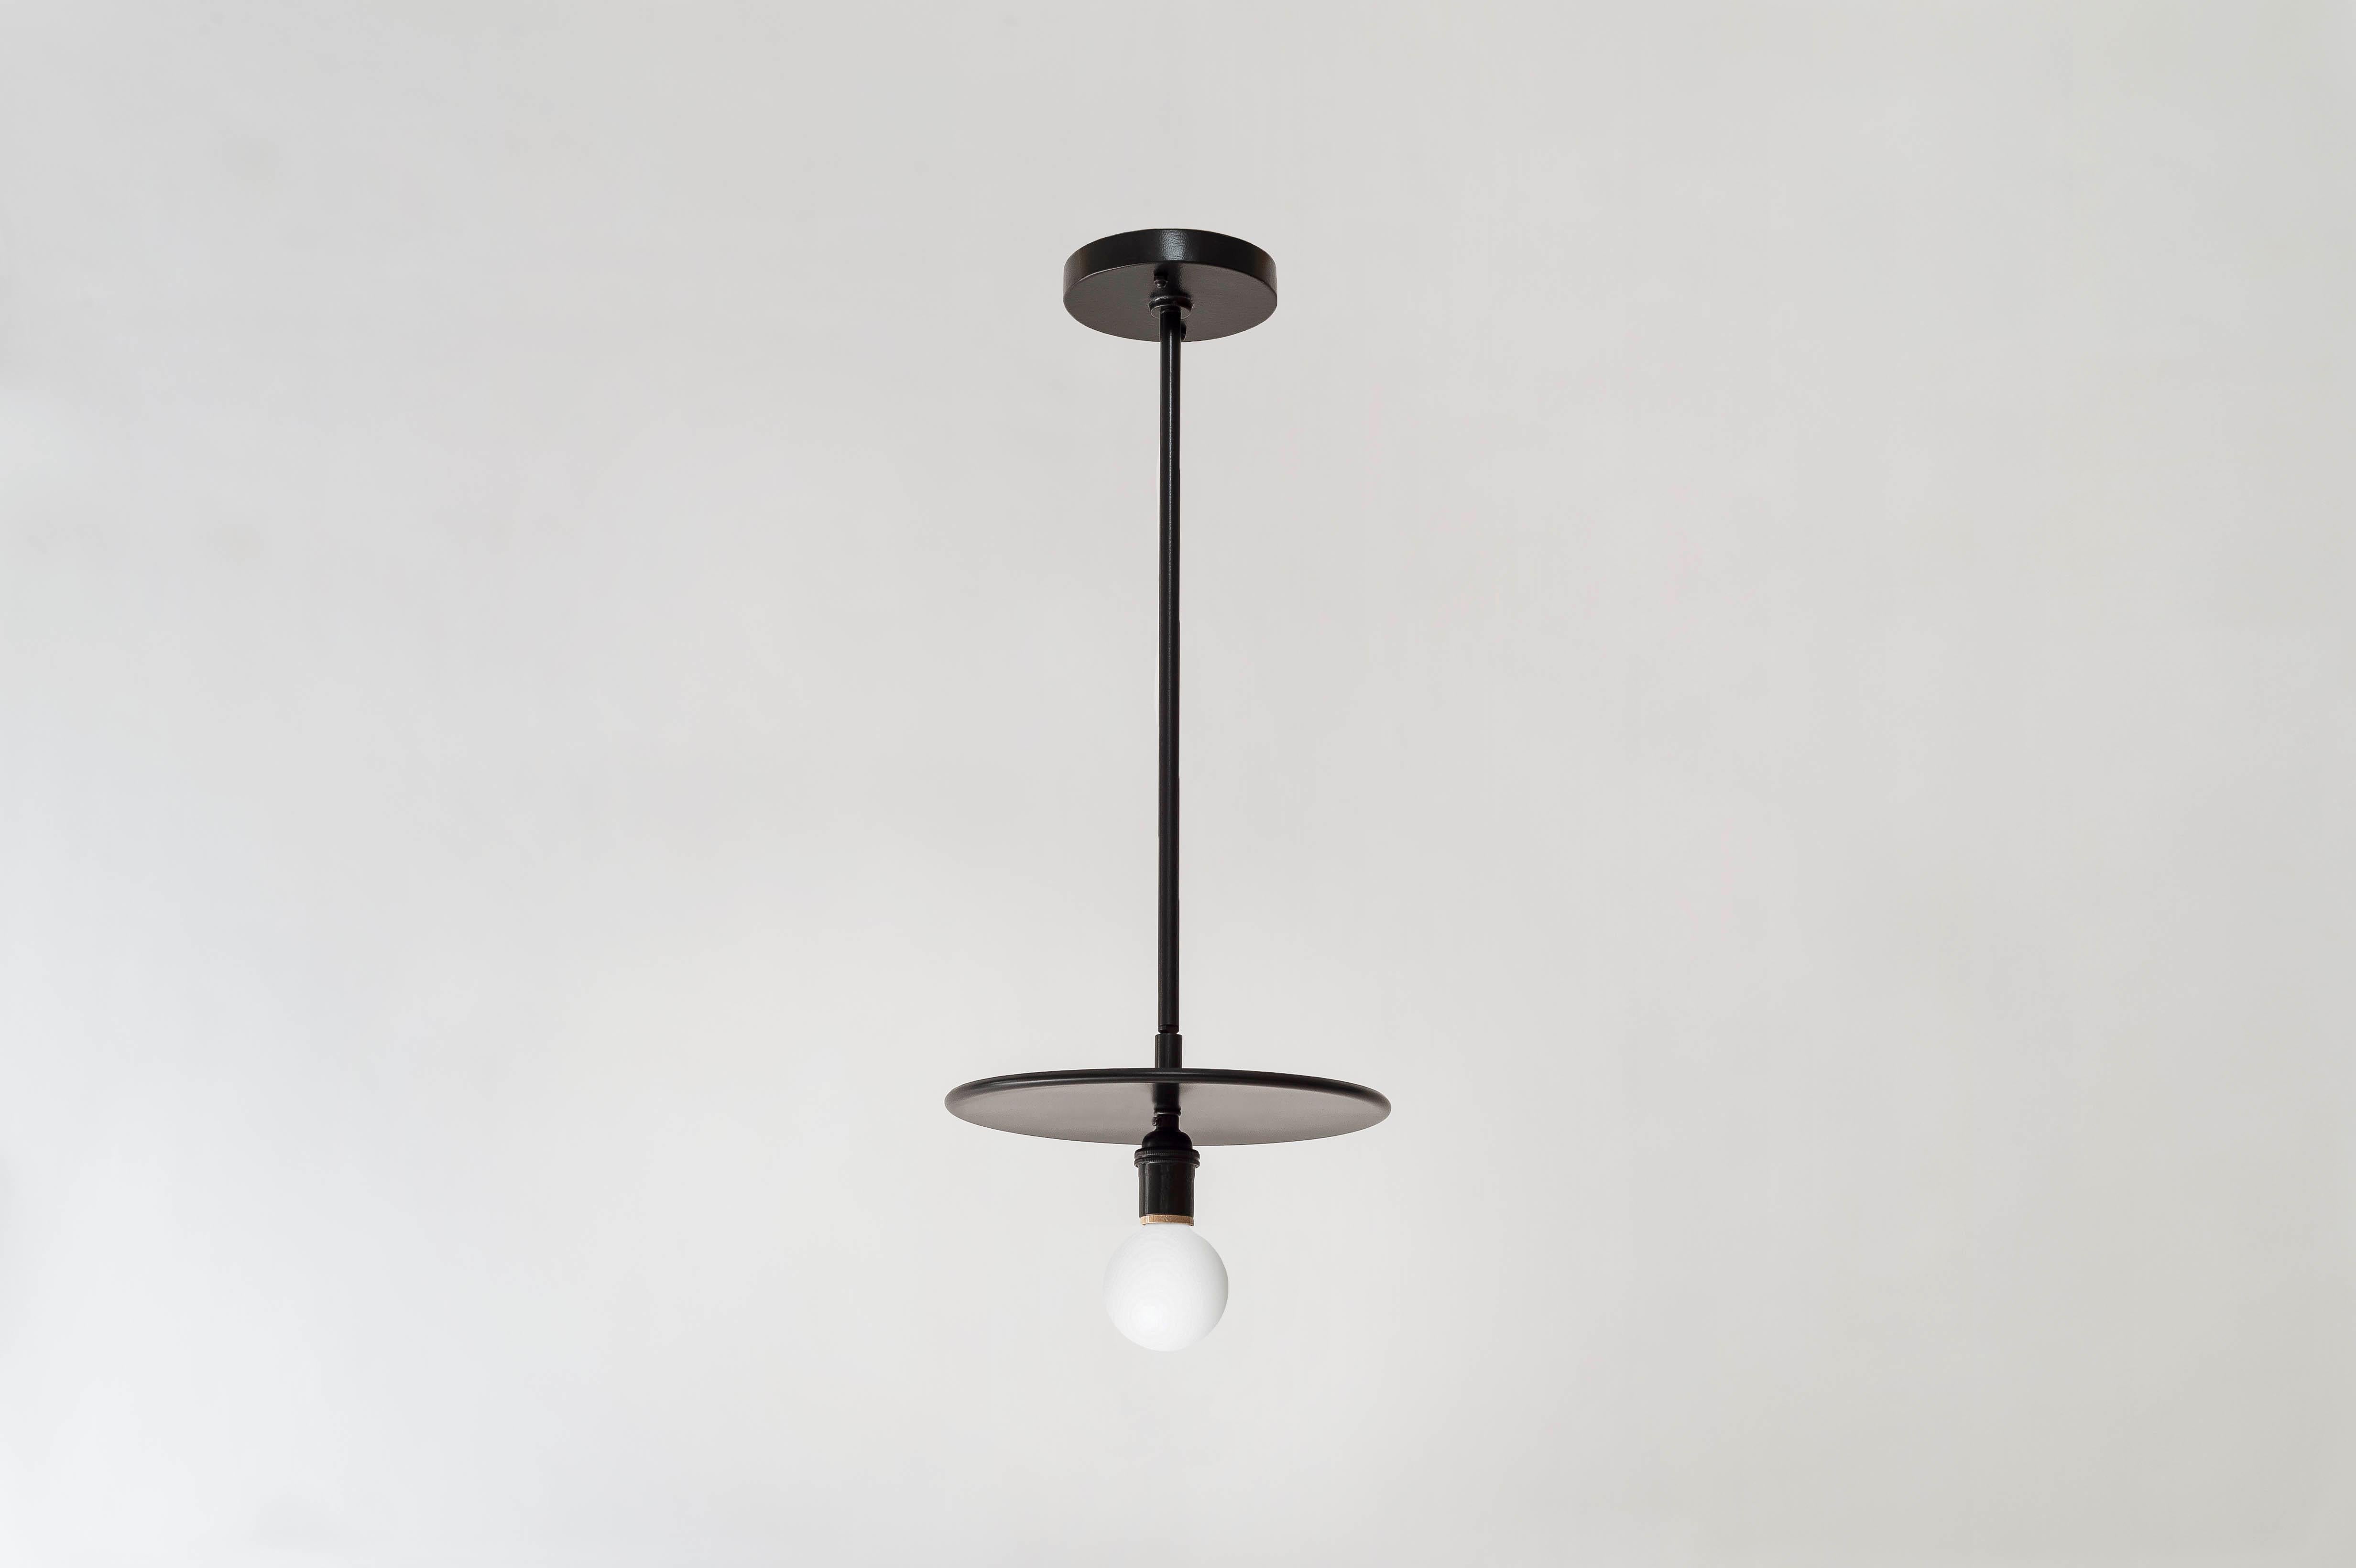 This elemental pendant comes in an all-black finish. A pivot joint allows for 90 degrees of rotation. The dimension of the rod can be customized at three standard lengths (24